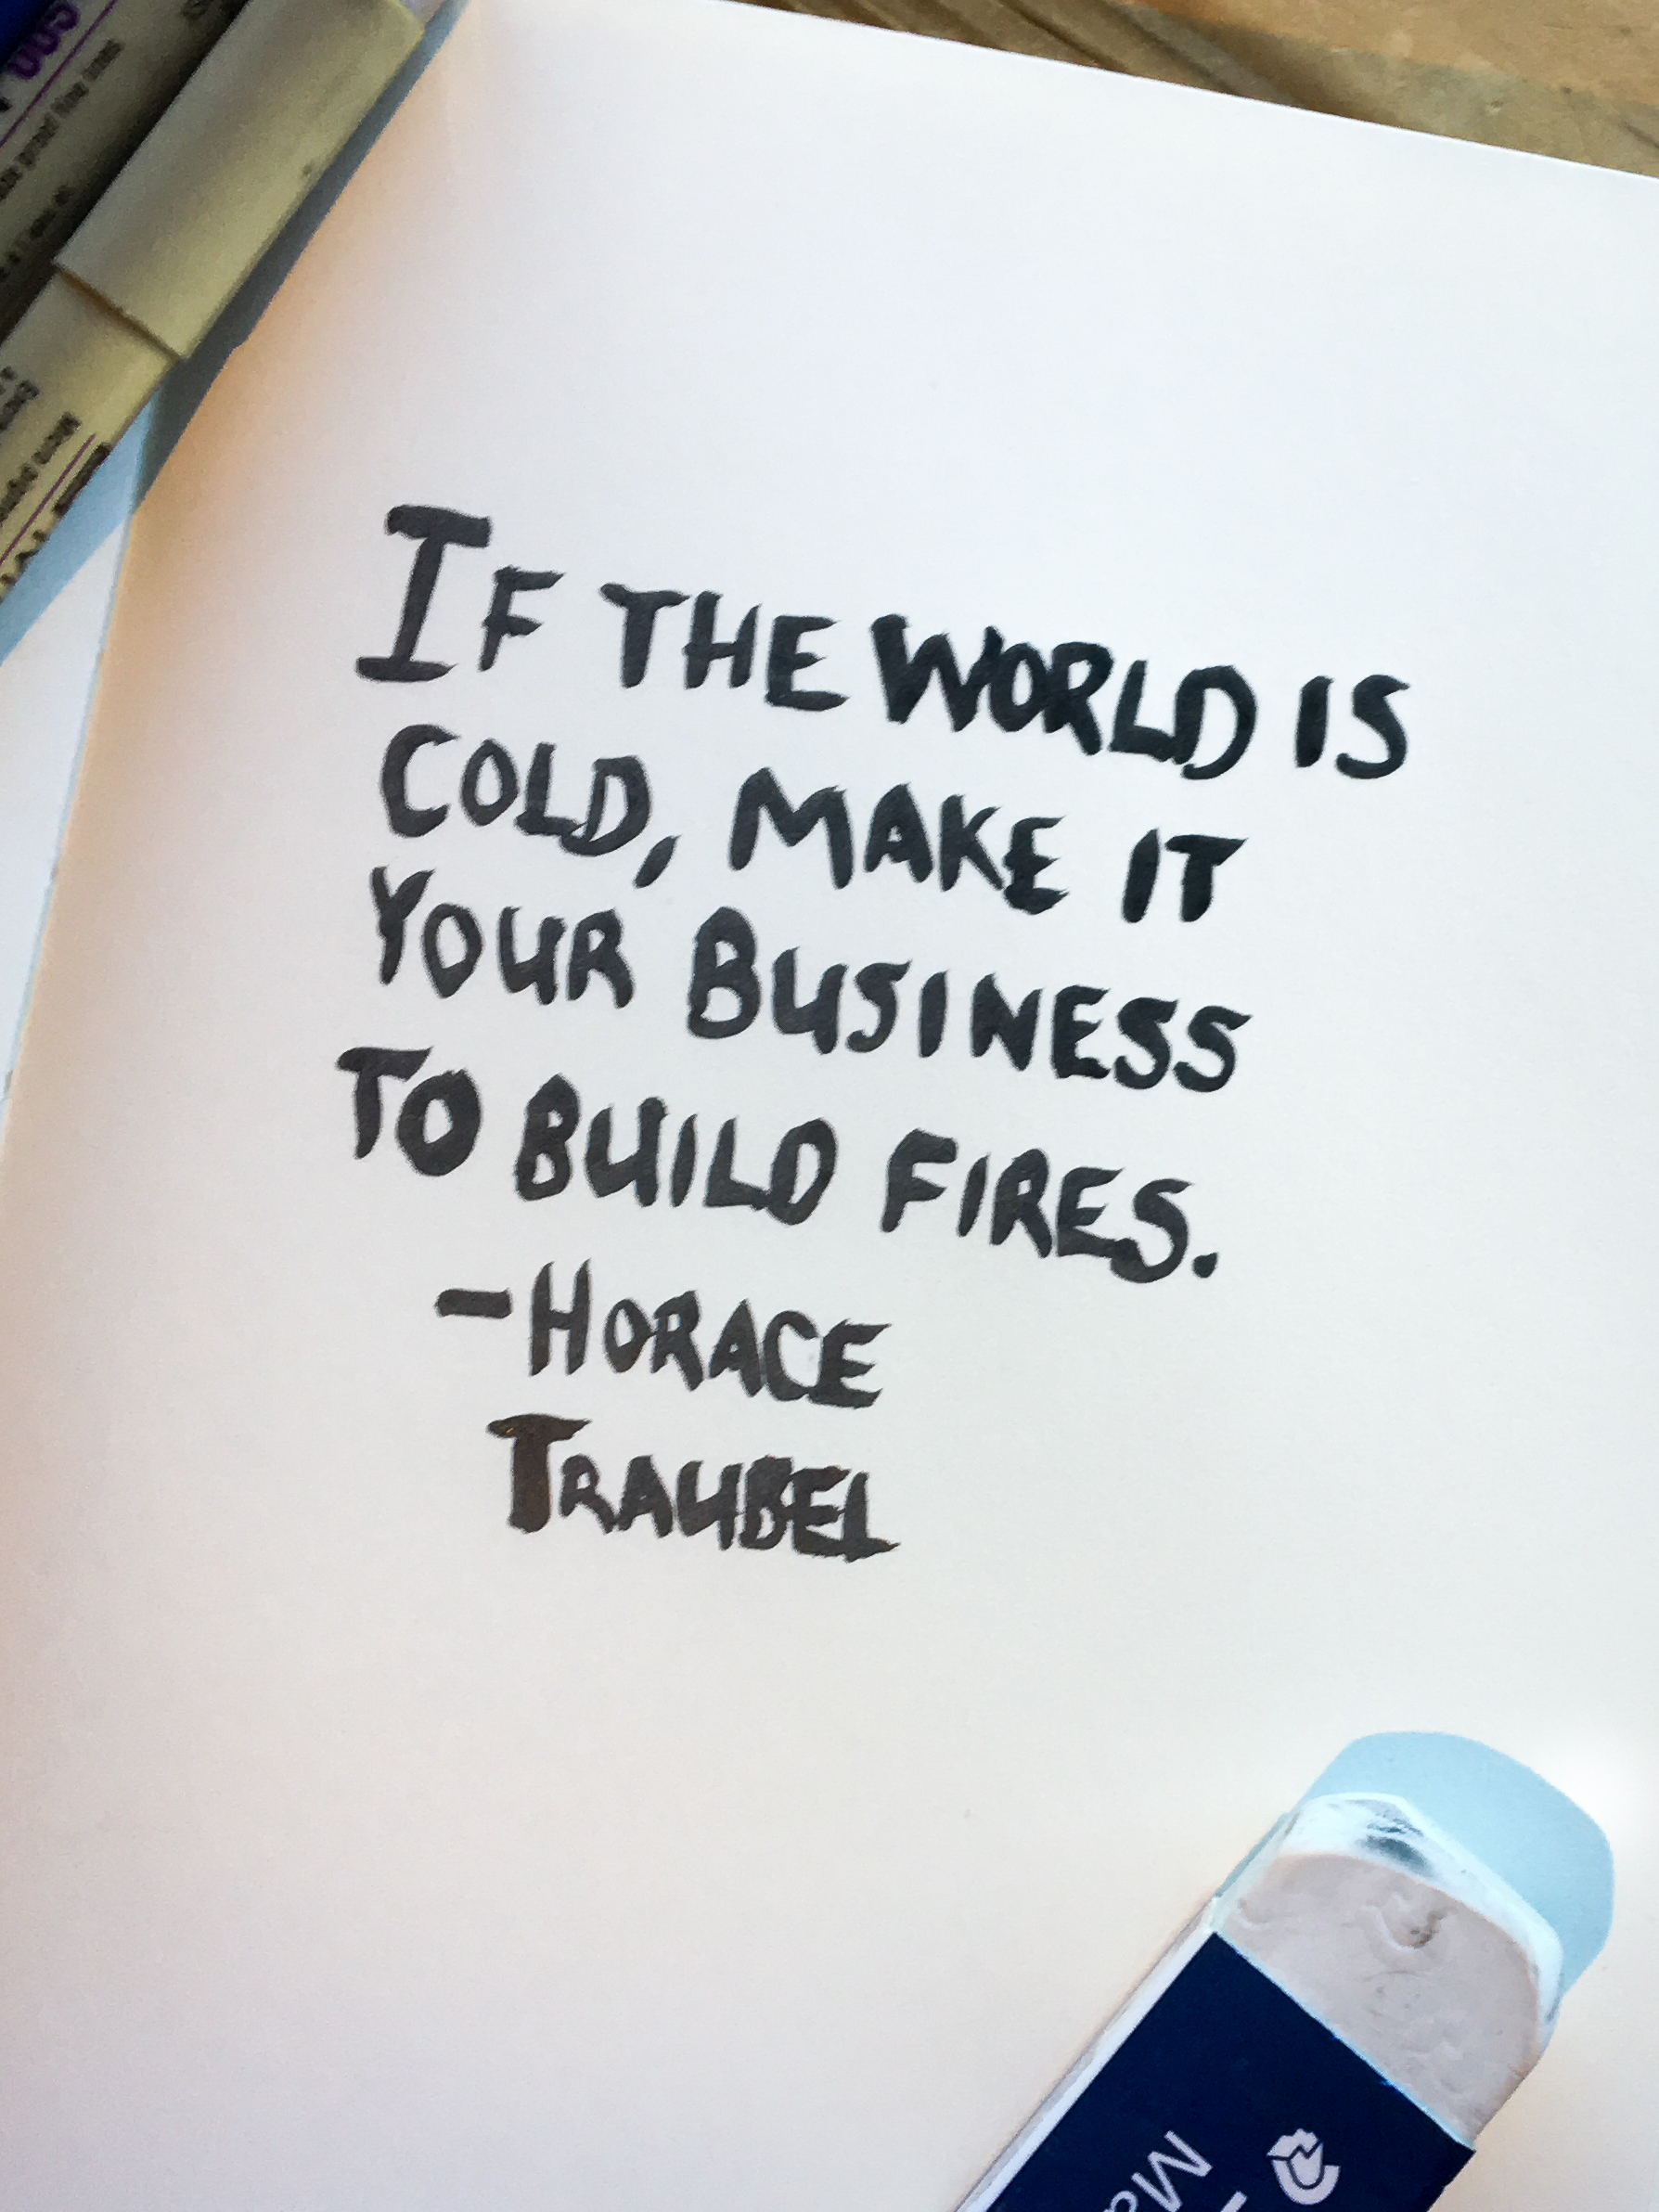 horace traubel quote